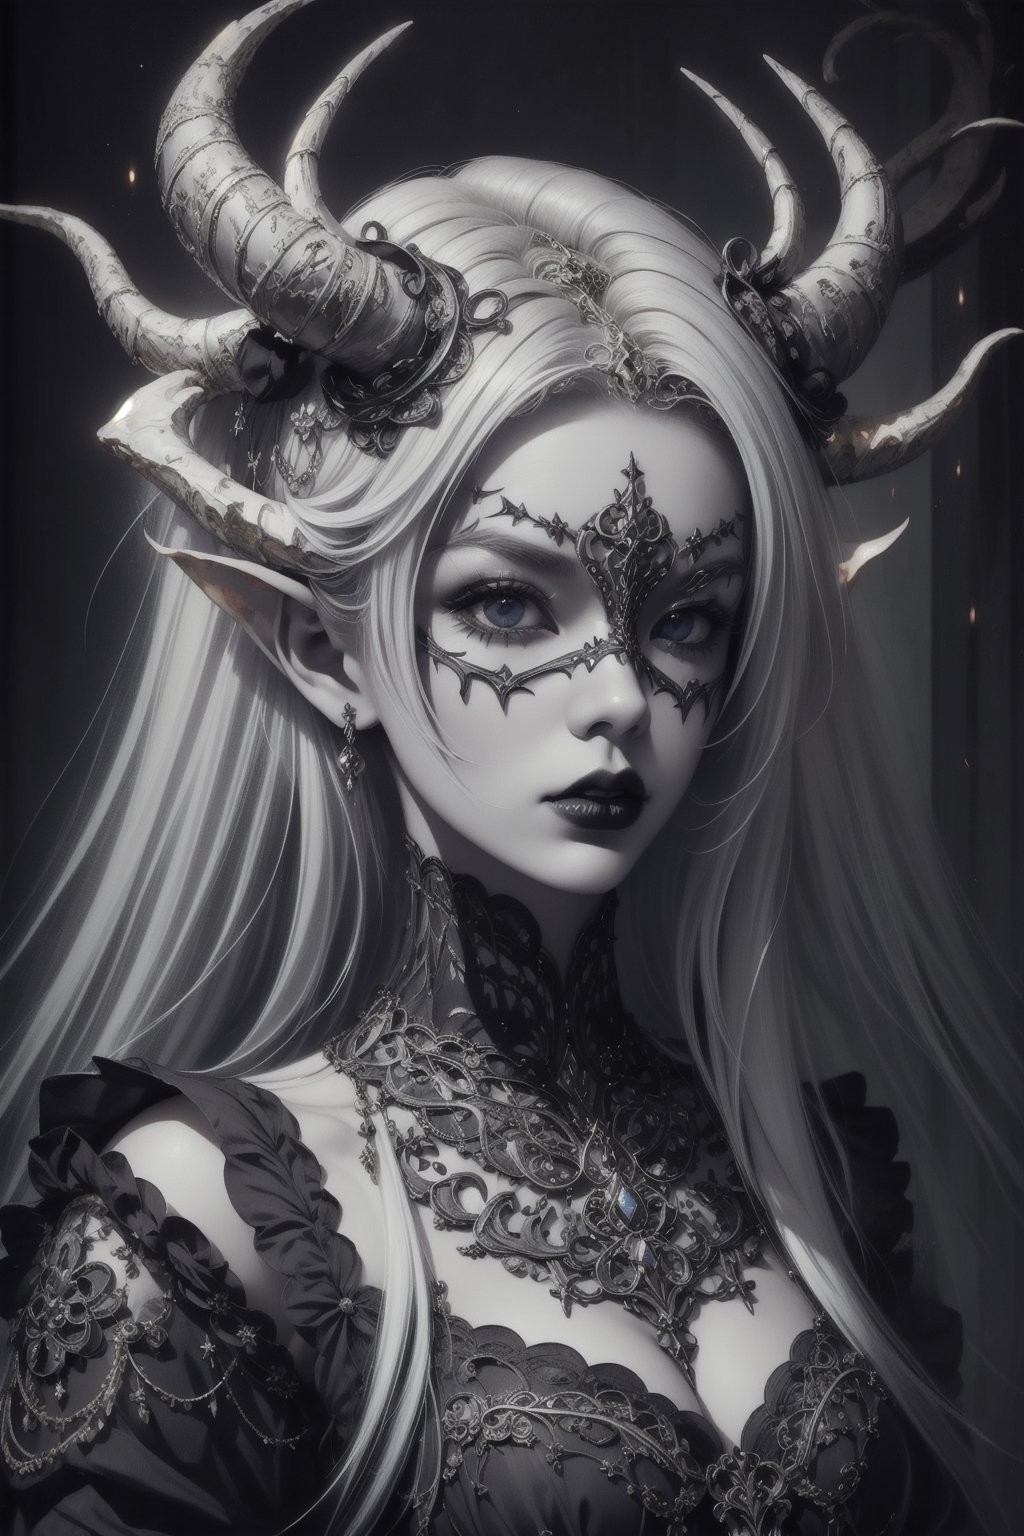 1girl,.albino demon little queen, (long intricate horns), a sister clad in gothic punk attire, face concealed behind a striking masquerade mask,themed,white_aesthetics,photorealistic,Masterpiece,Realistic,dark fantasy color image